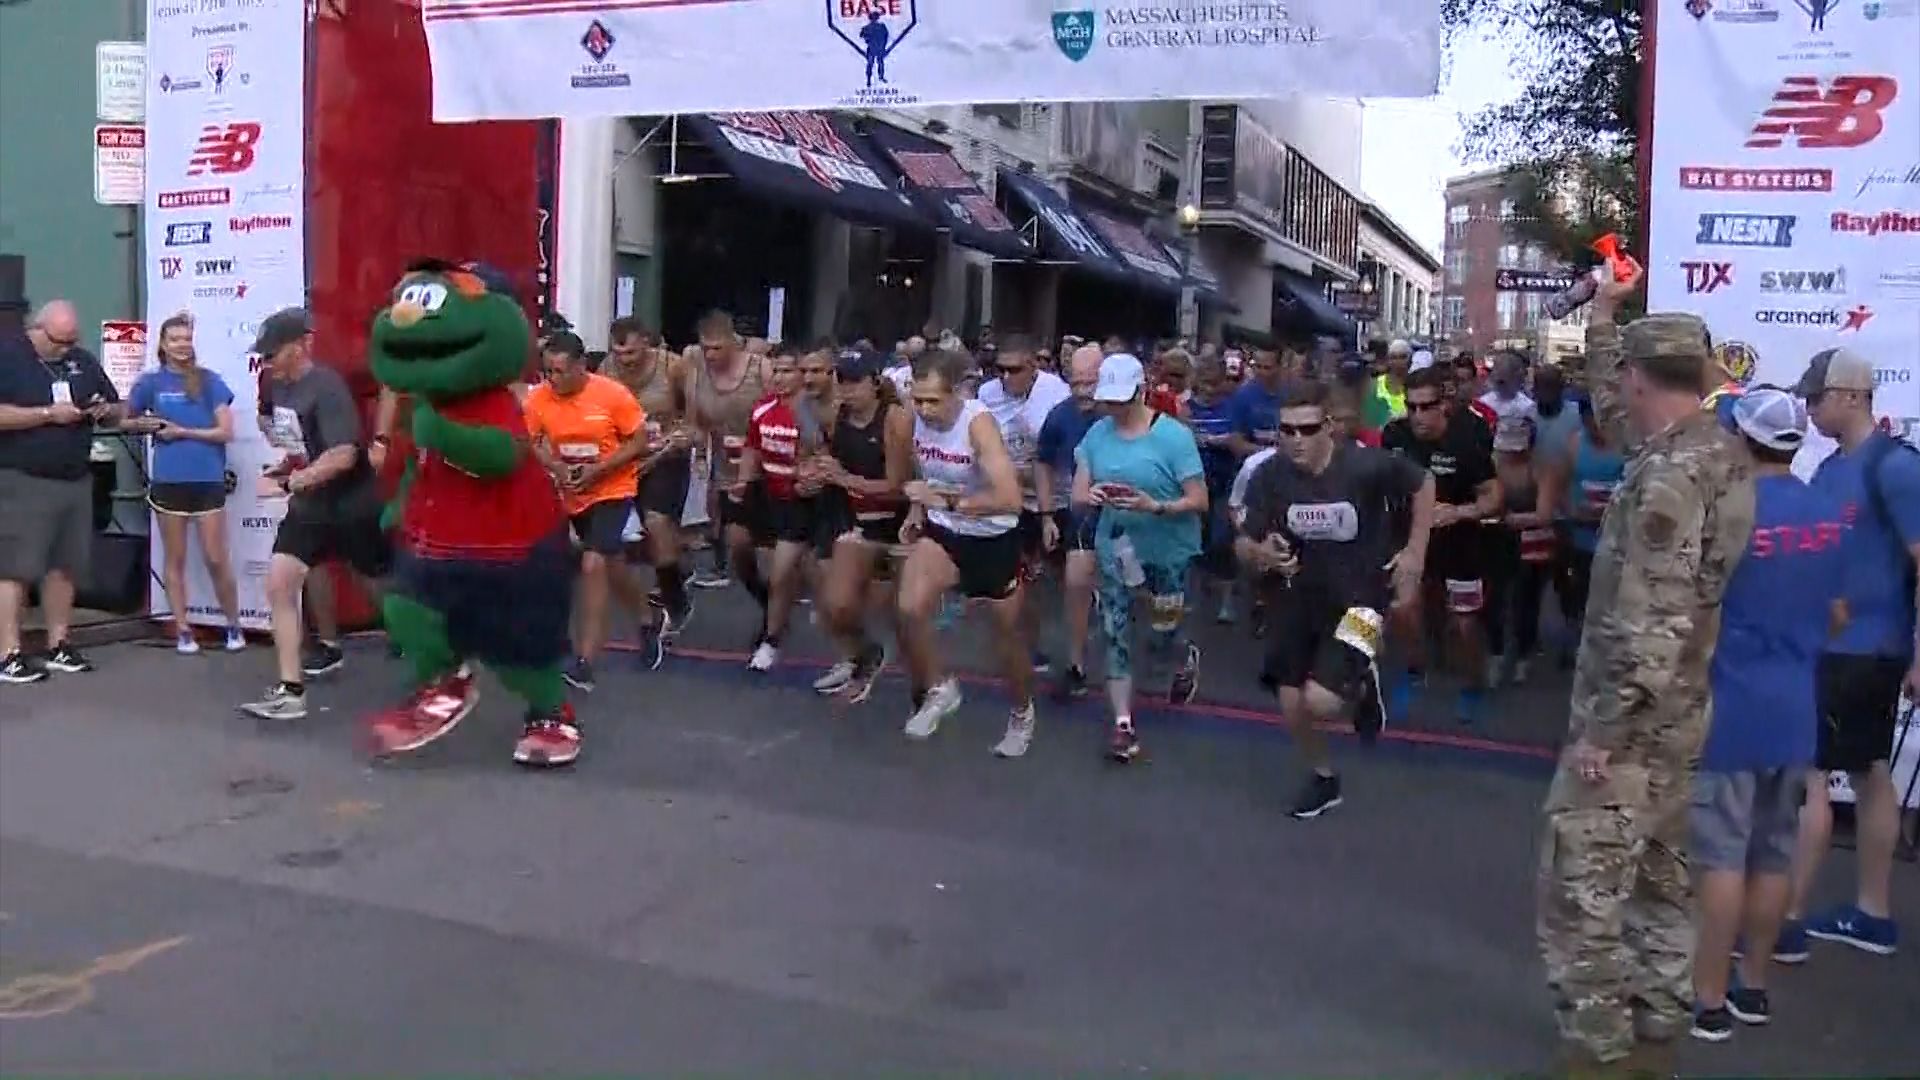 Run to Home Base at Fenway Park celebrates 10th anniversary